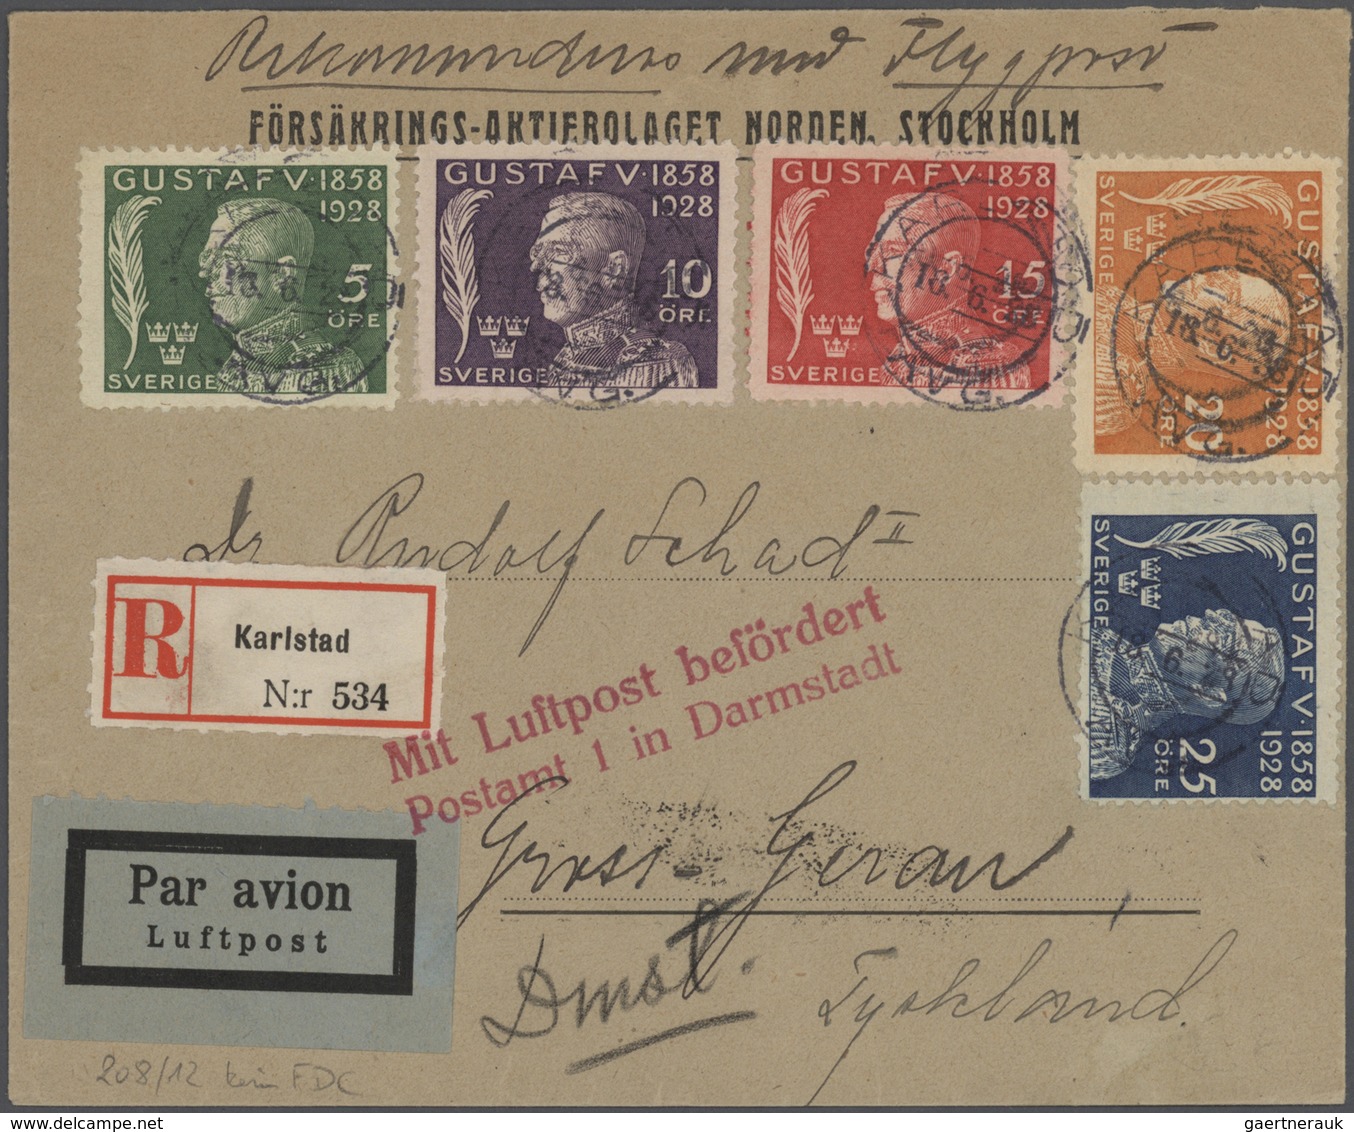 27963 Schweden: 1722/1960, interesting lot of ca. 55 better covers and 9 regulations for post offices (172